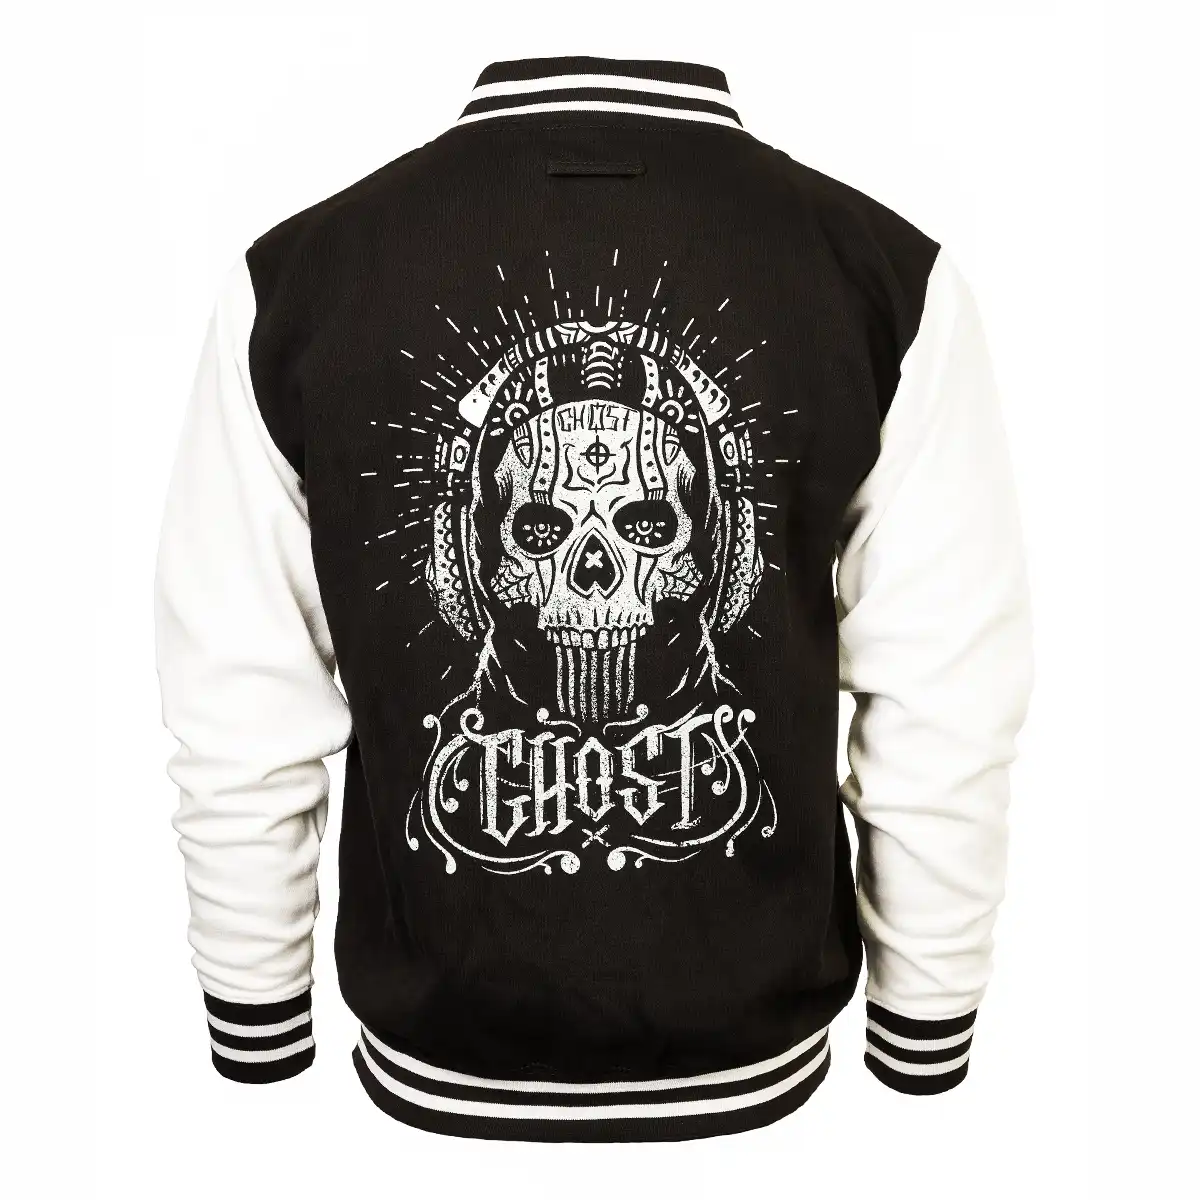 Call of Duty College Jacket "Ghost" Black/White XXL Image 2